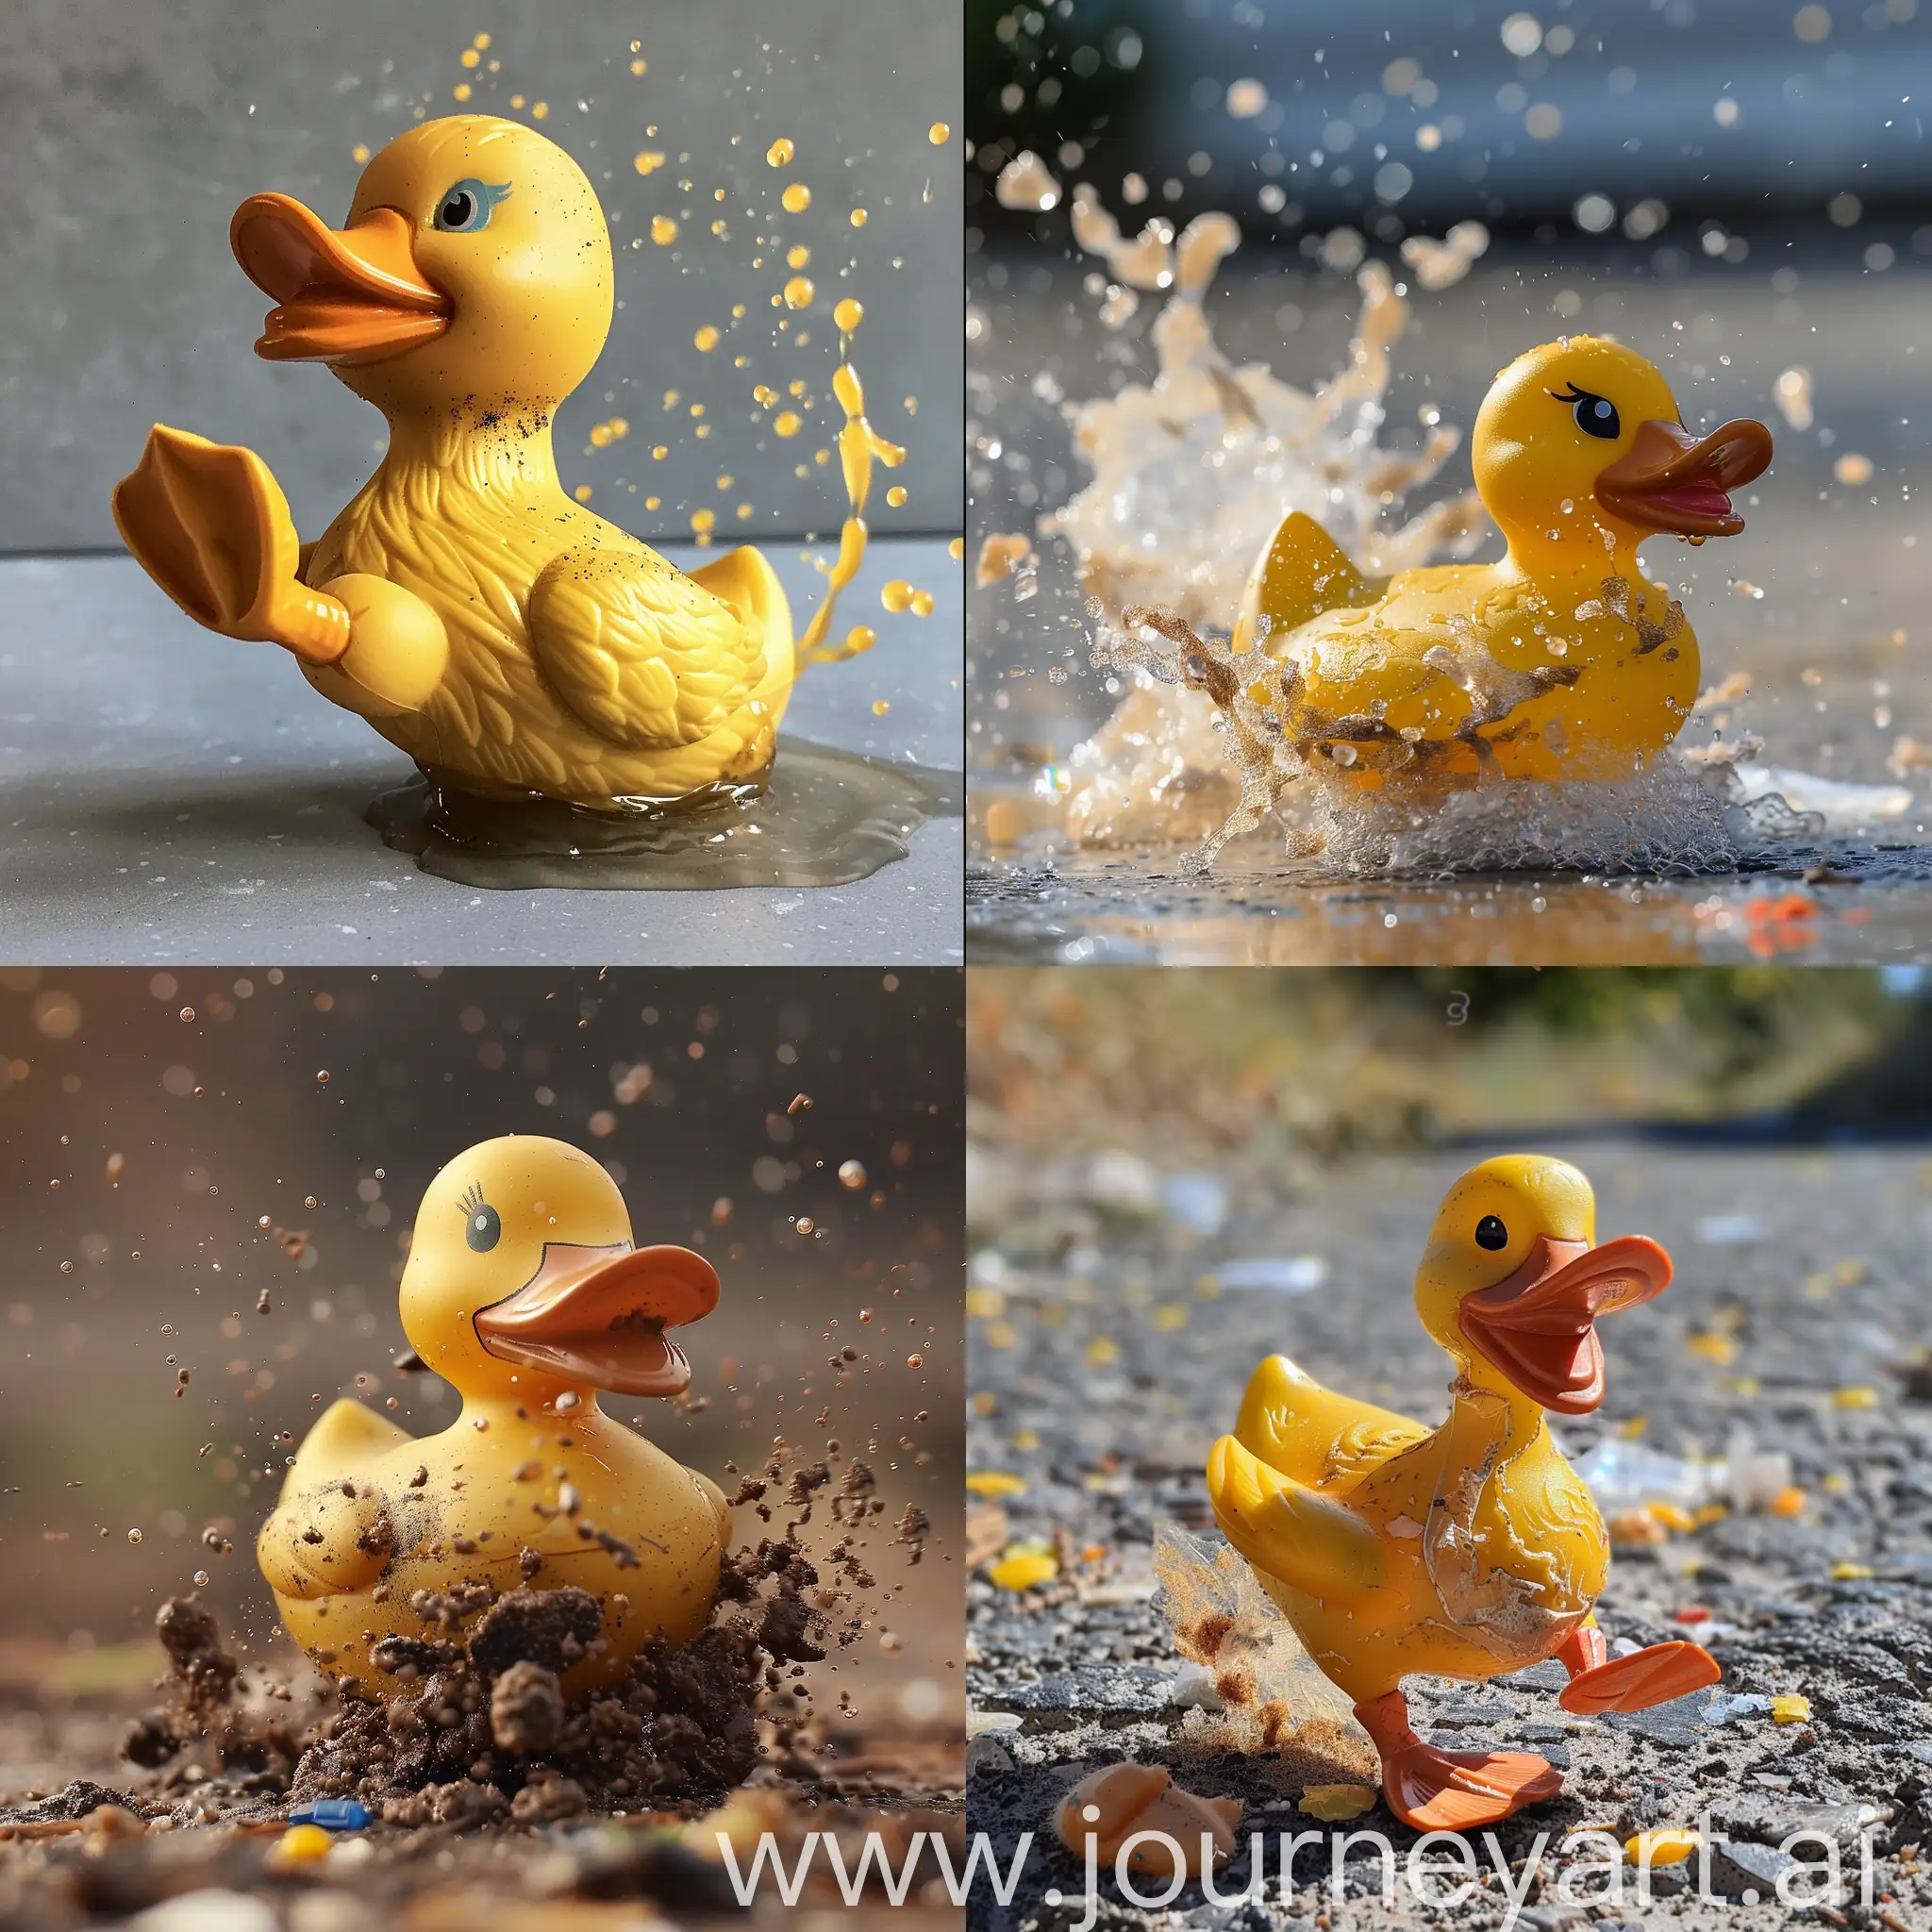 Playful-Rubber-Toy-Duck-Flying-into-the-Trash